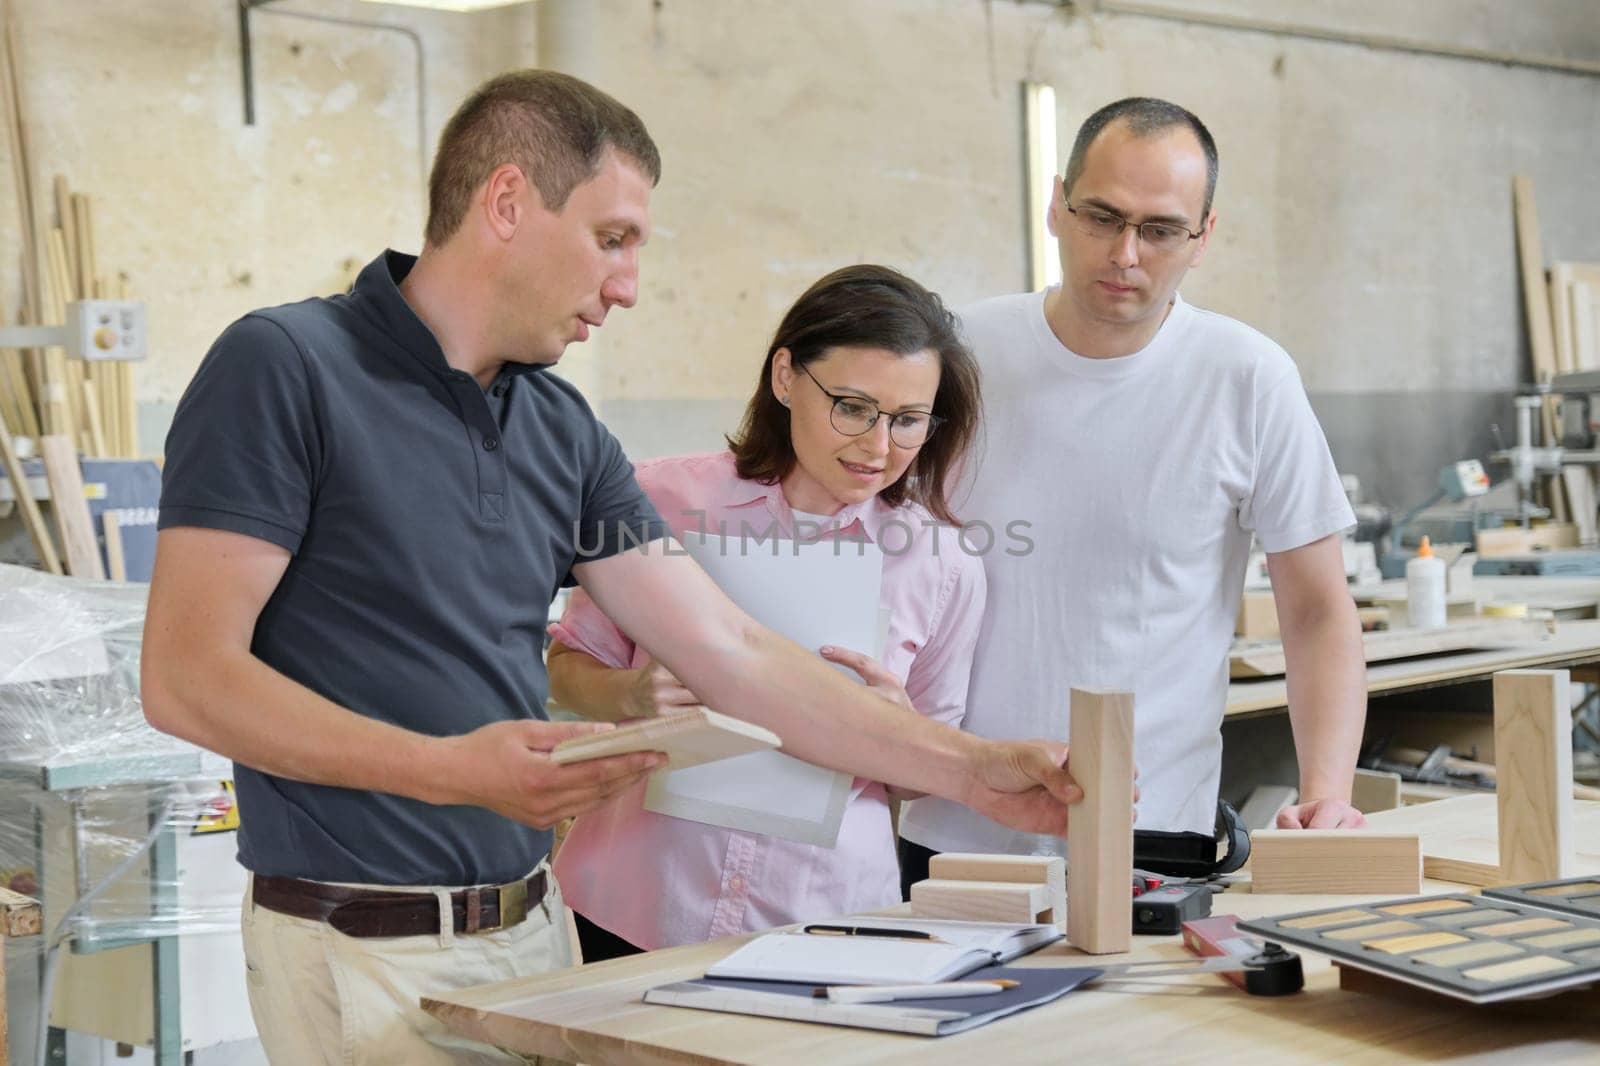 Group of people designer, client, carpenter, engineer choosing wooden products, working discussion, background carpentry workshop.